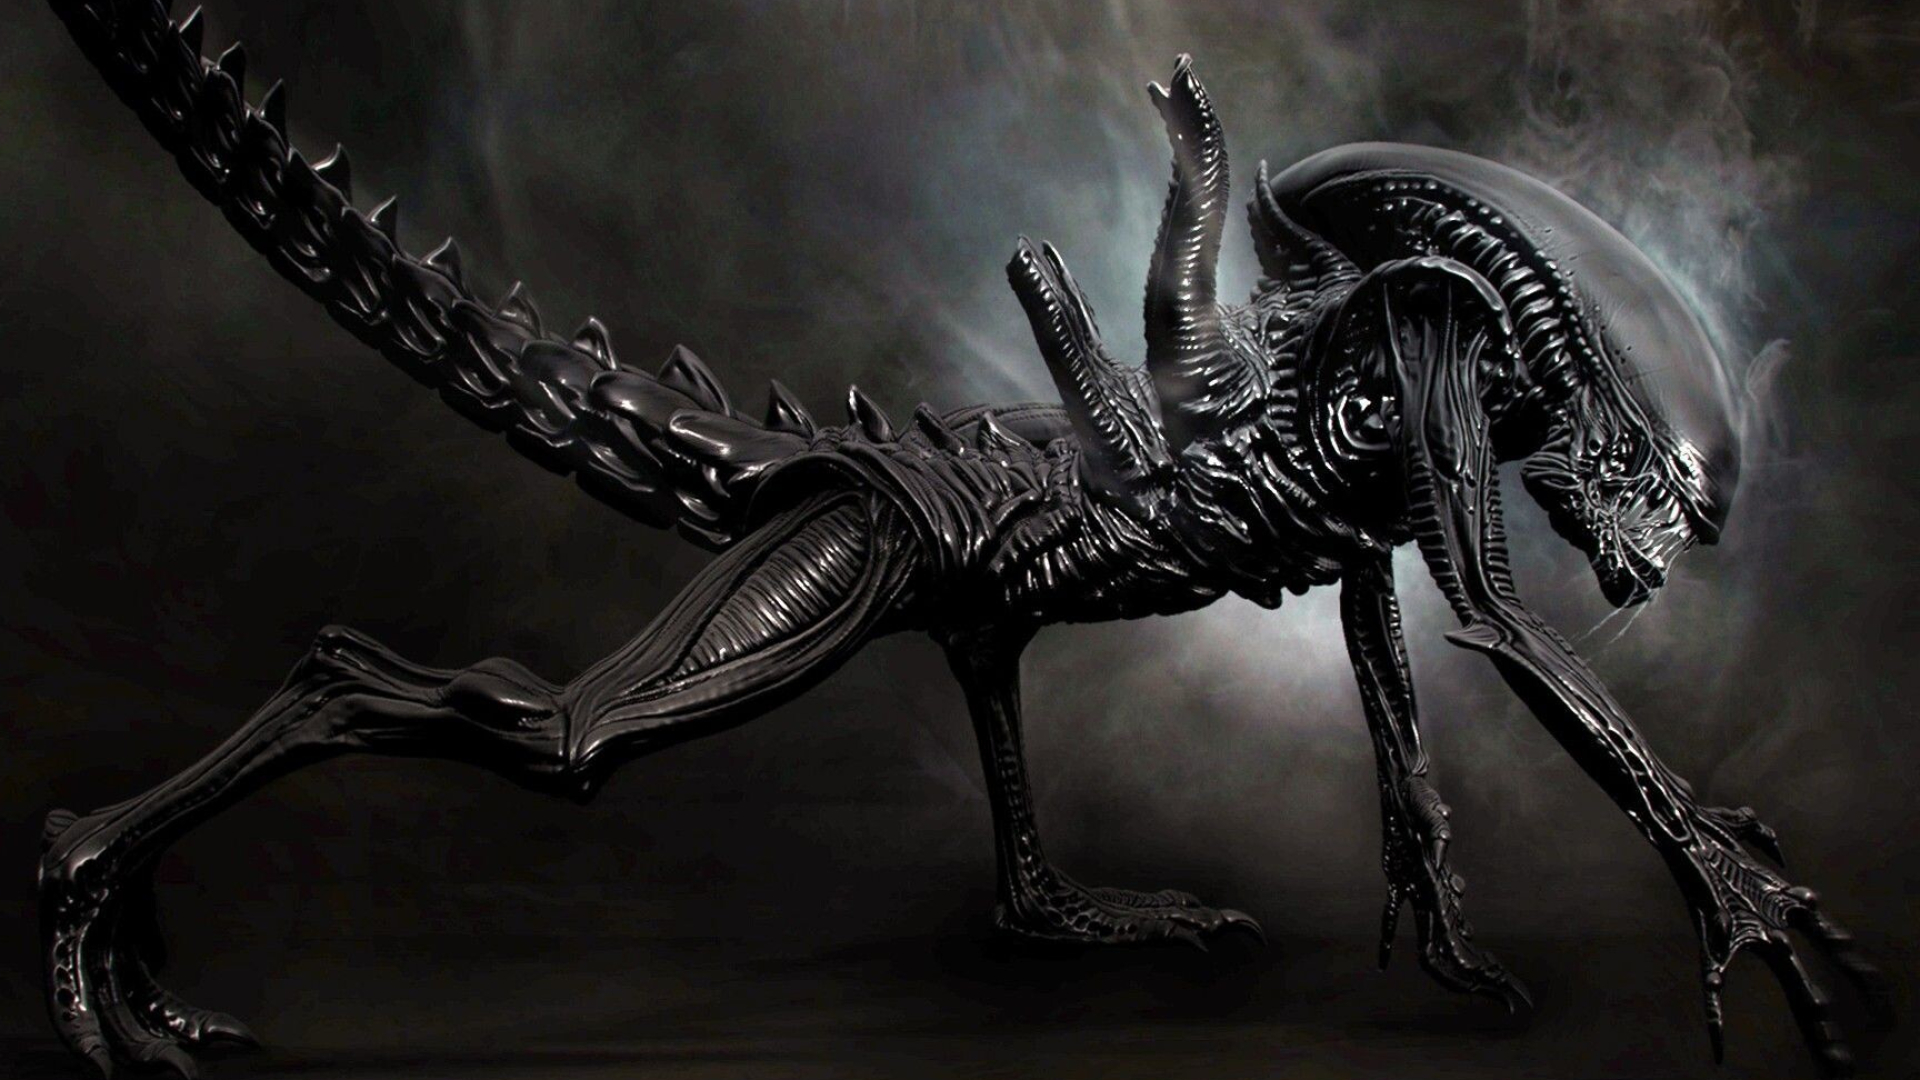 H.R. Giger: Xenomorph, Alien: Isolation, Survival Horror Game, Developed By Creative Assembly, 2014. 1920x1080 Full HD Background.